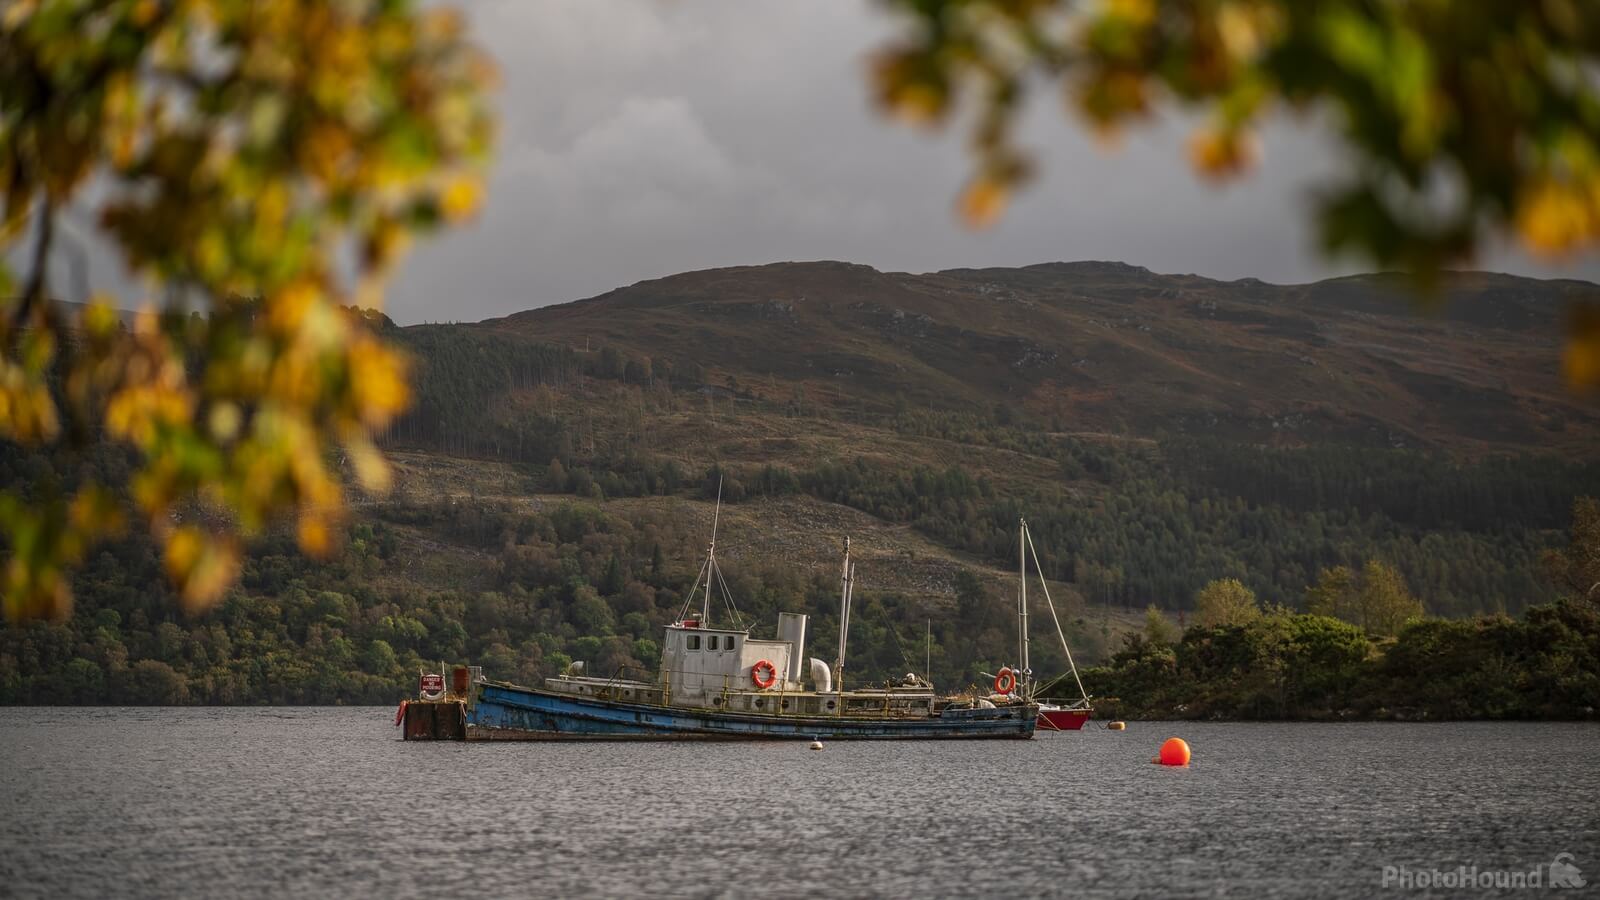 Image of Derelict Boats - Fort Augustus, Loch Ness by James Billings.